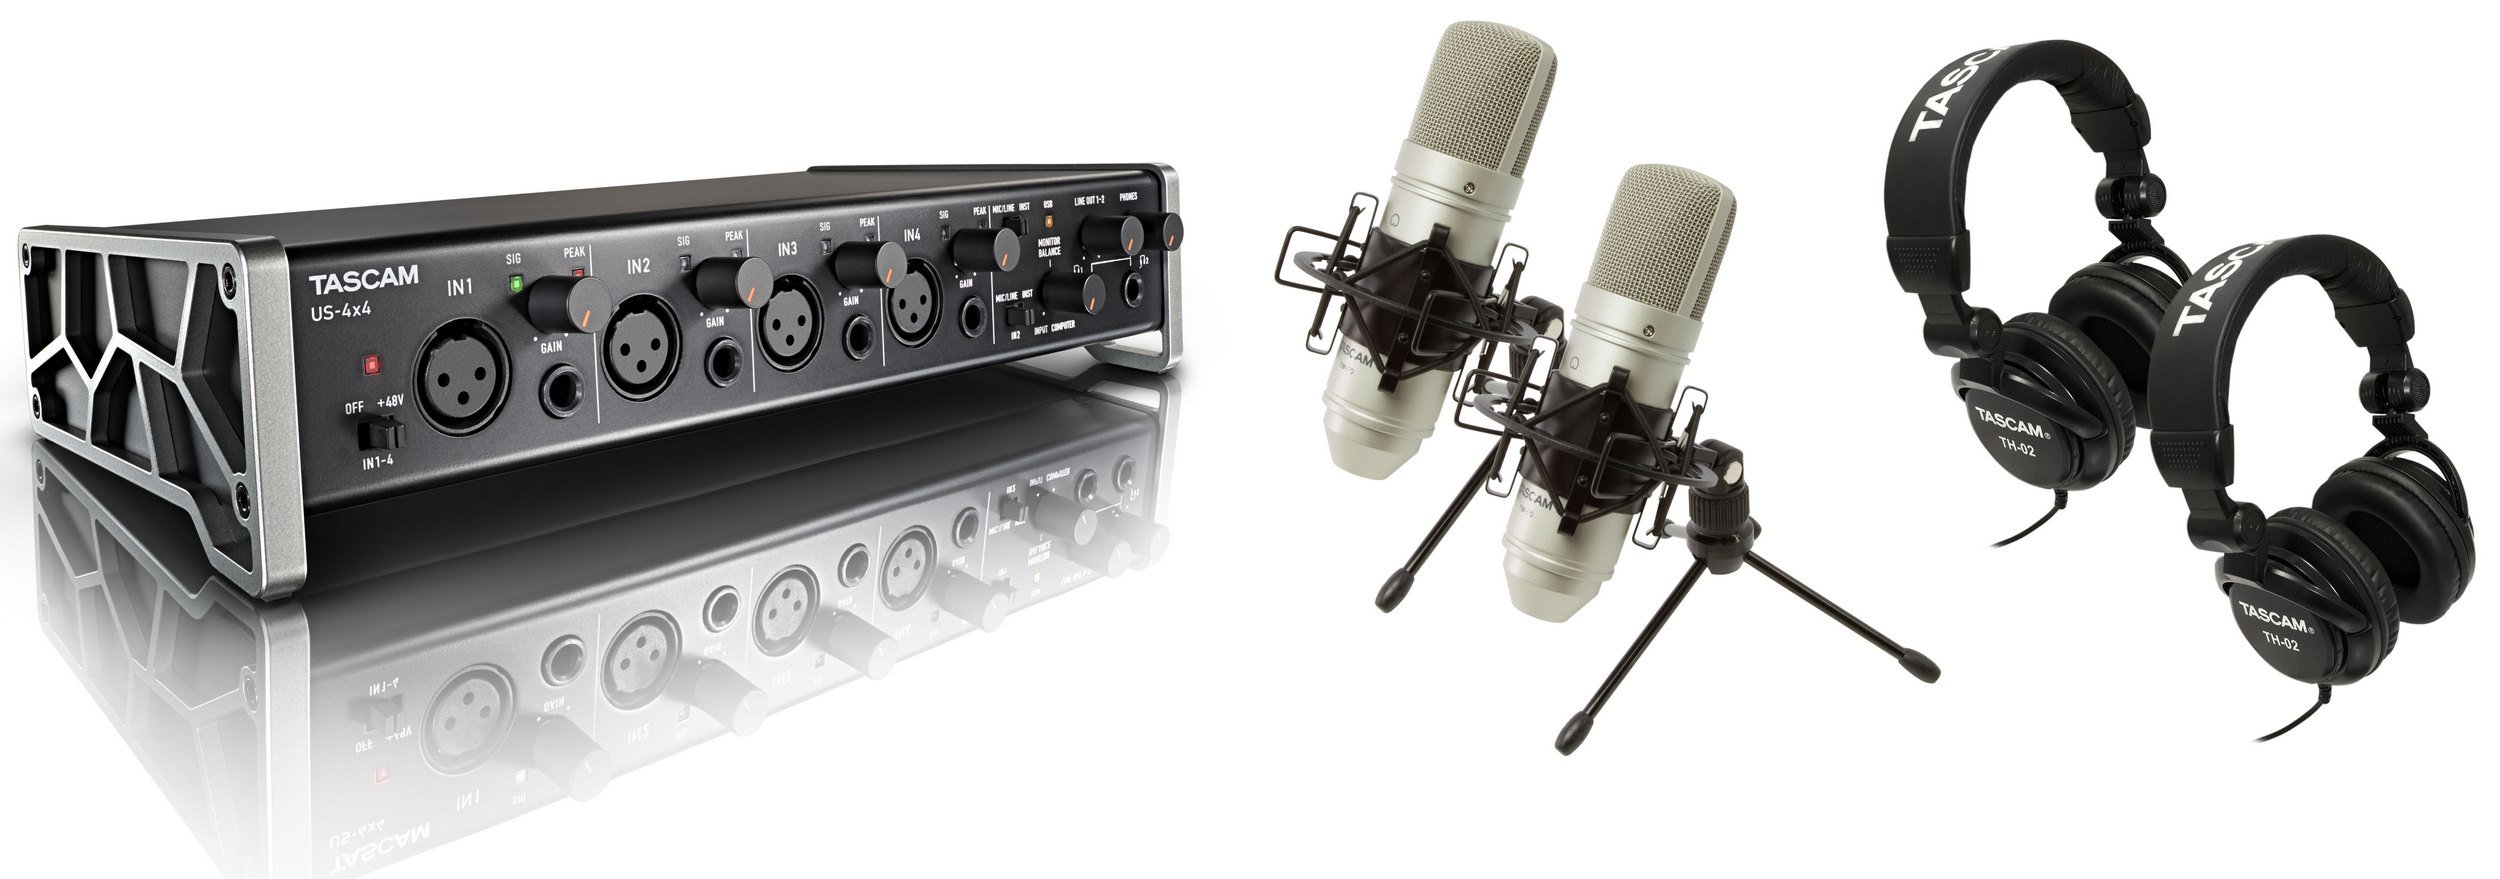    TASCAM TrackPack 4x4